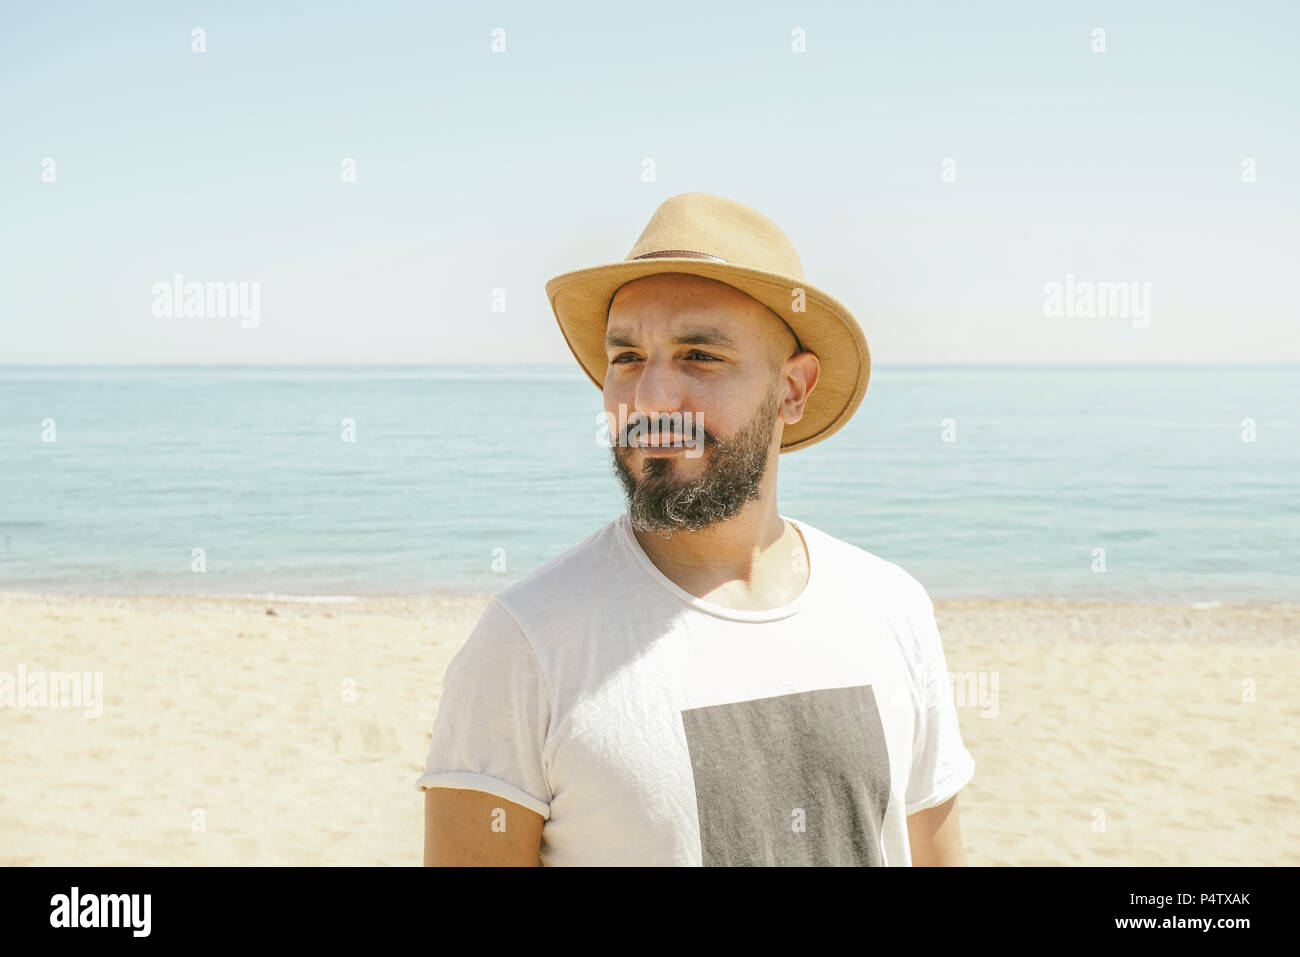 Portrait of a man wearing hat at the beach Stock Photo